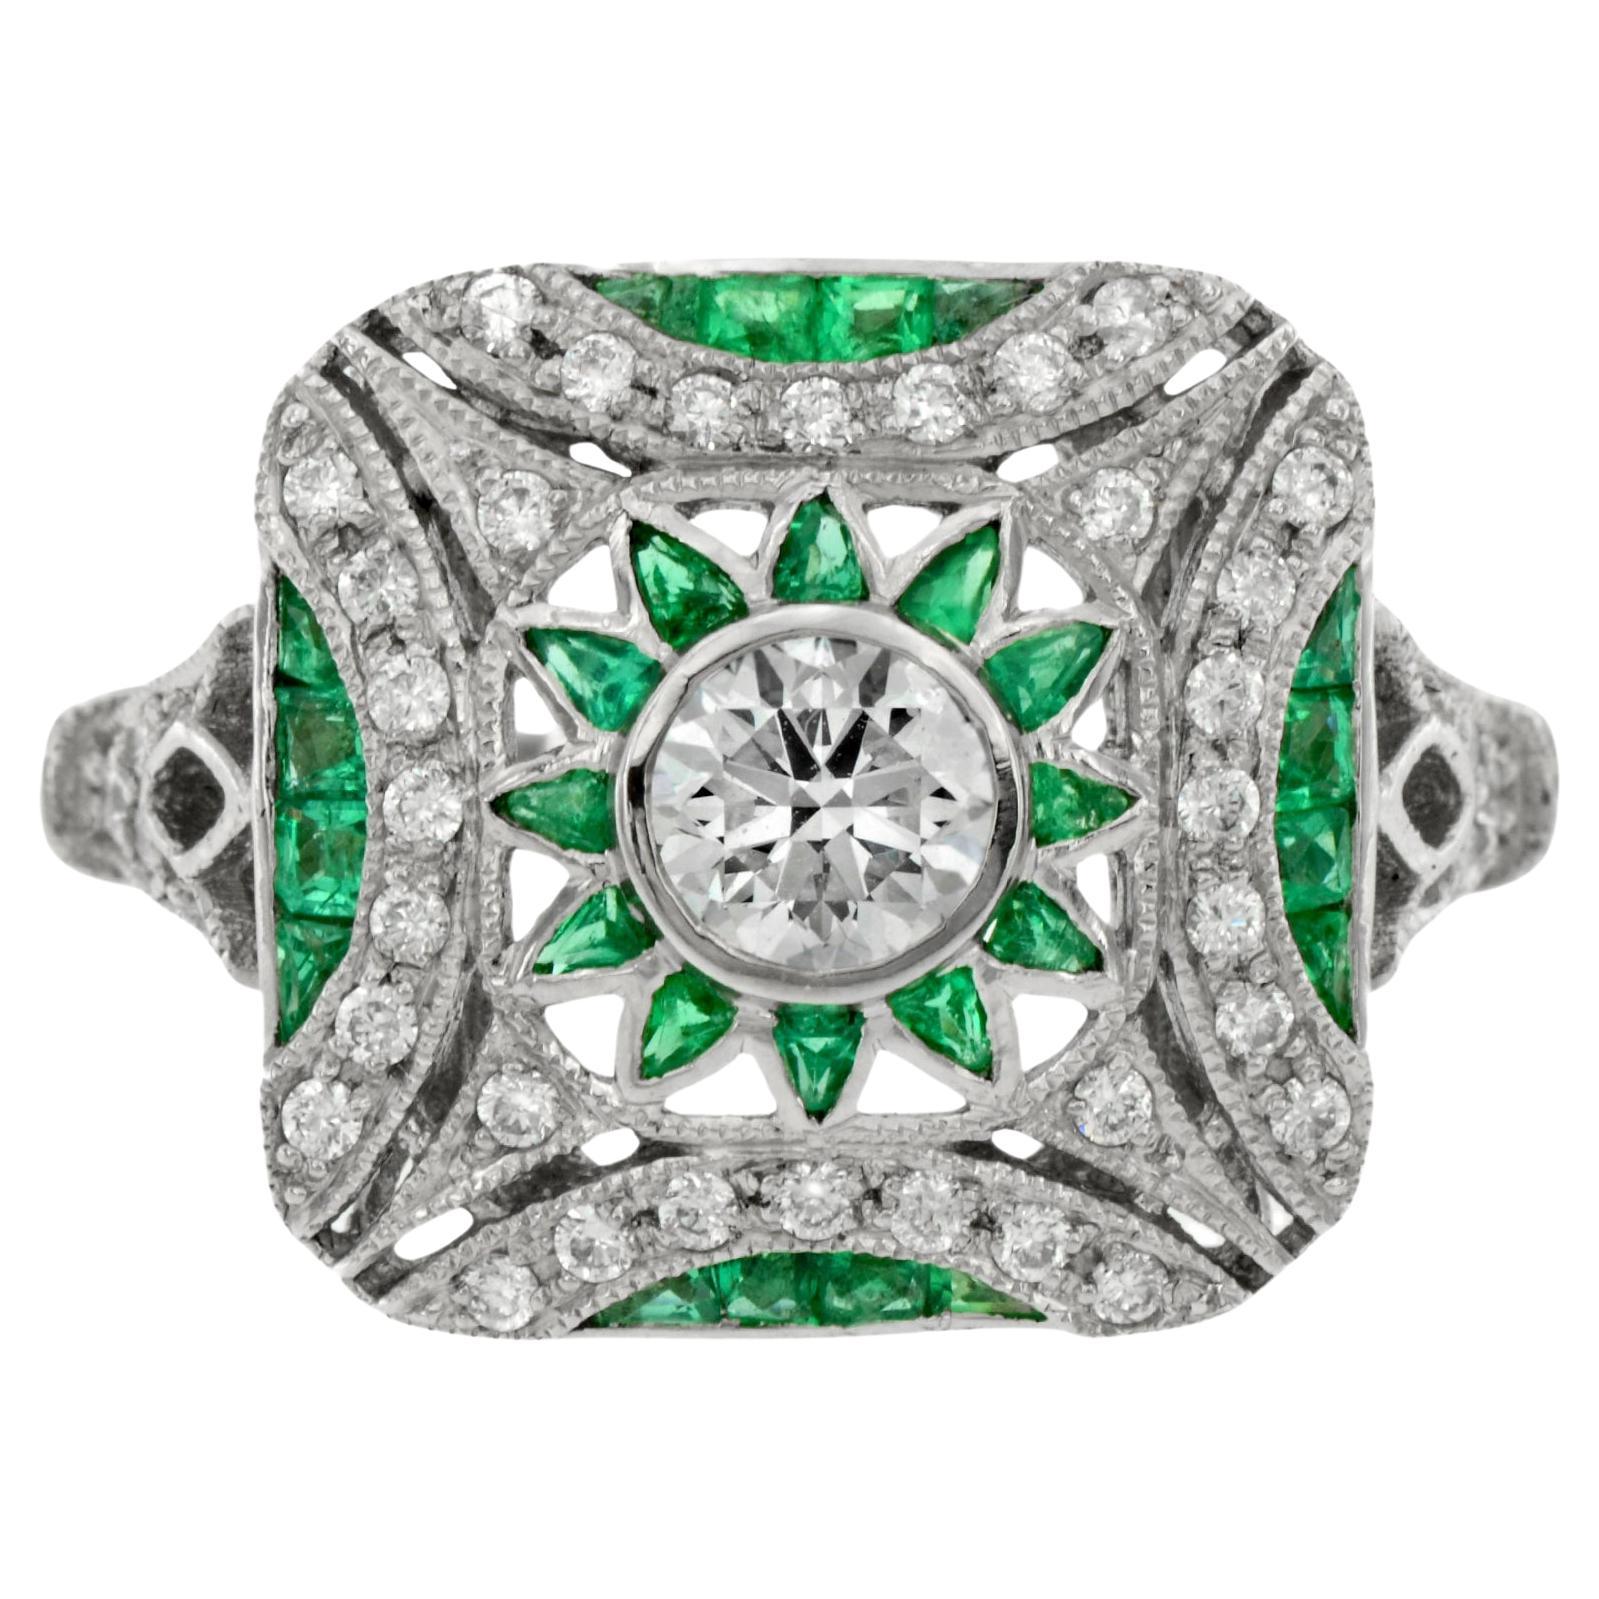 Diamond and Emerald Art Deco Style Engagement Ring in Platinum 950